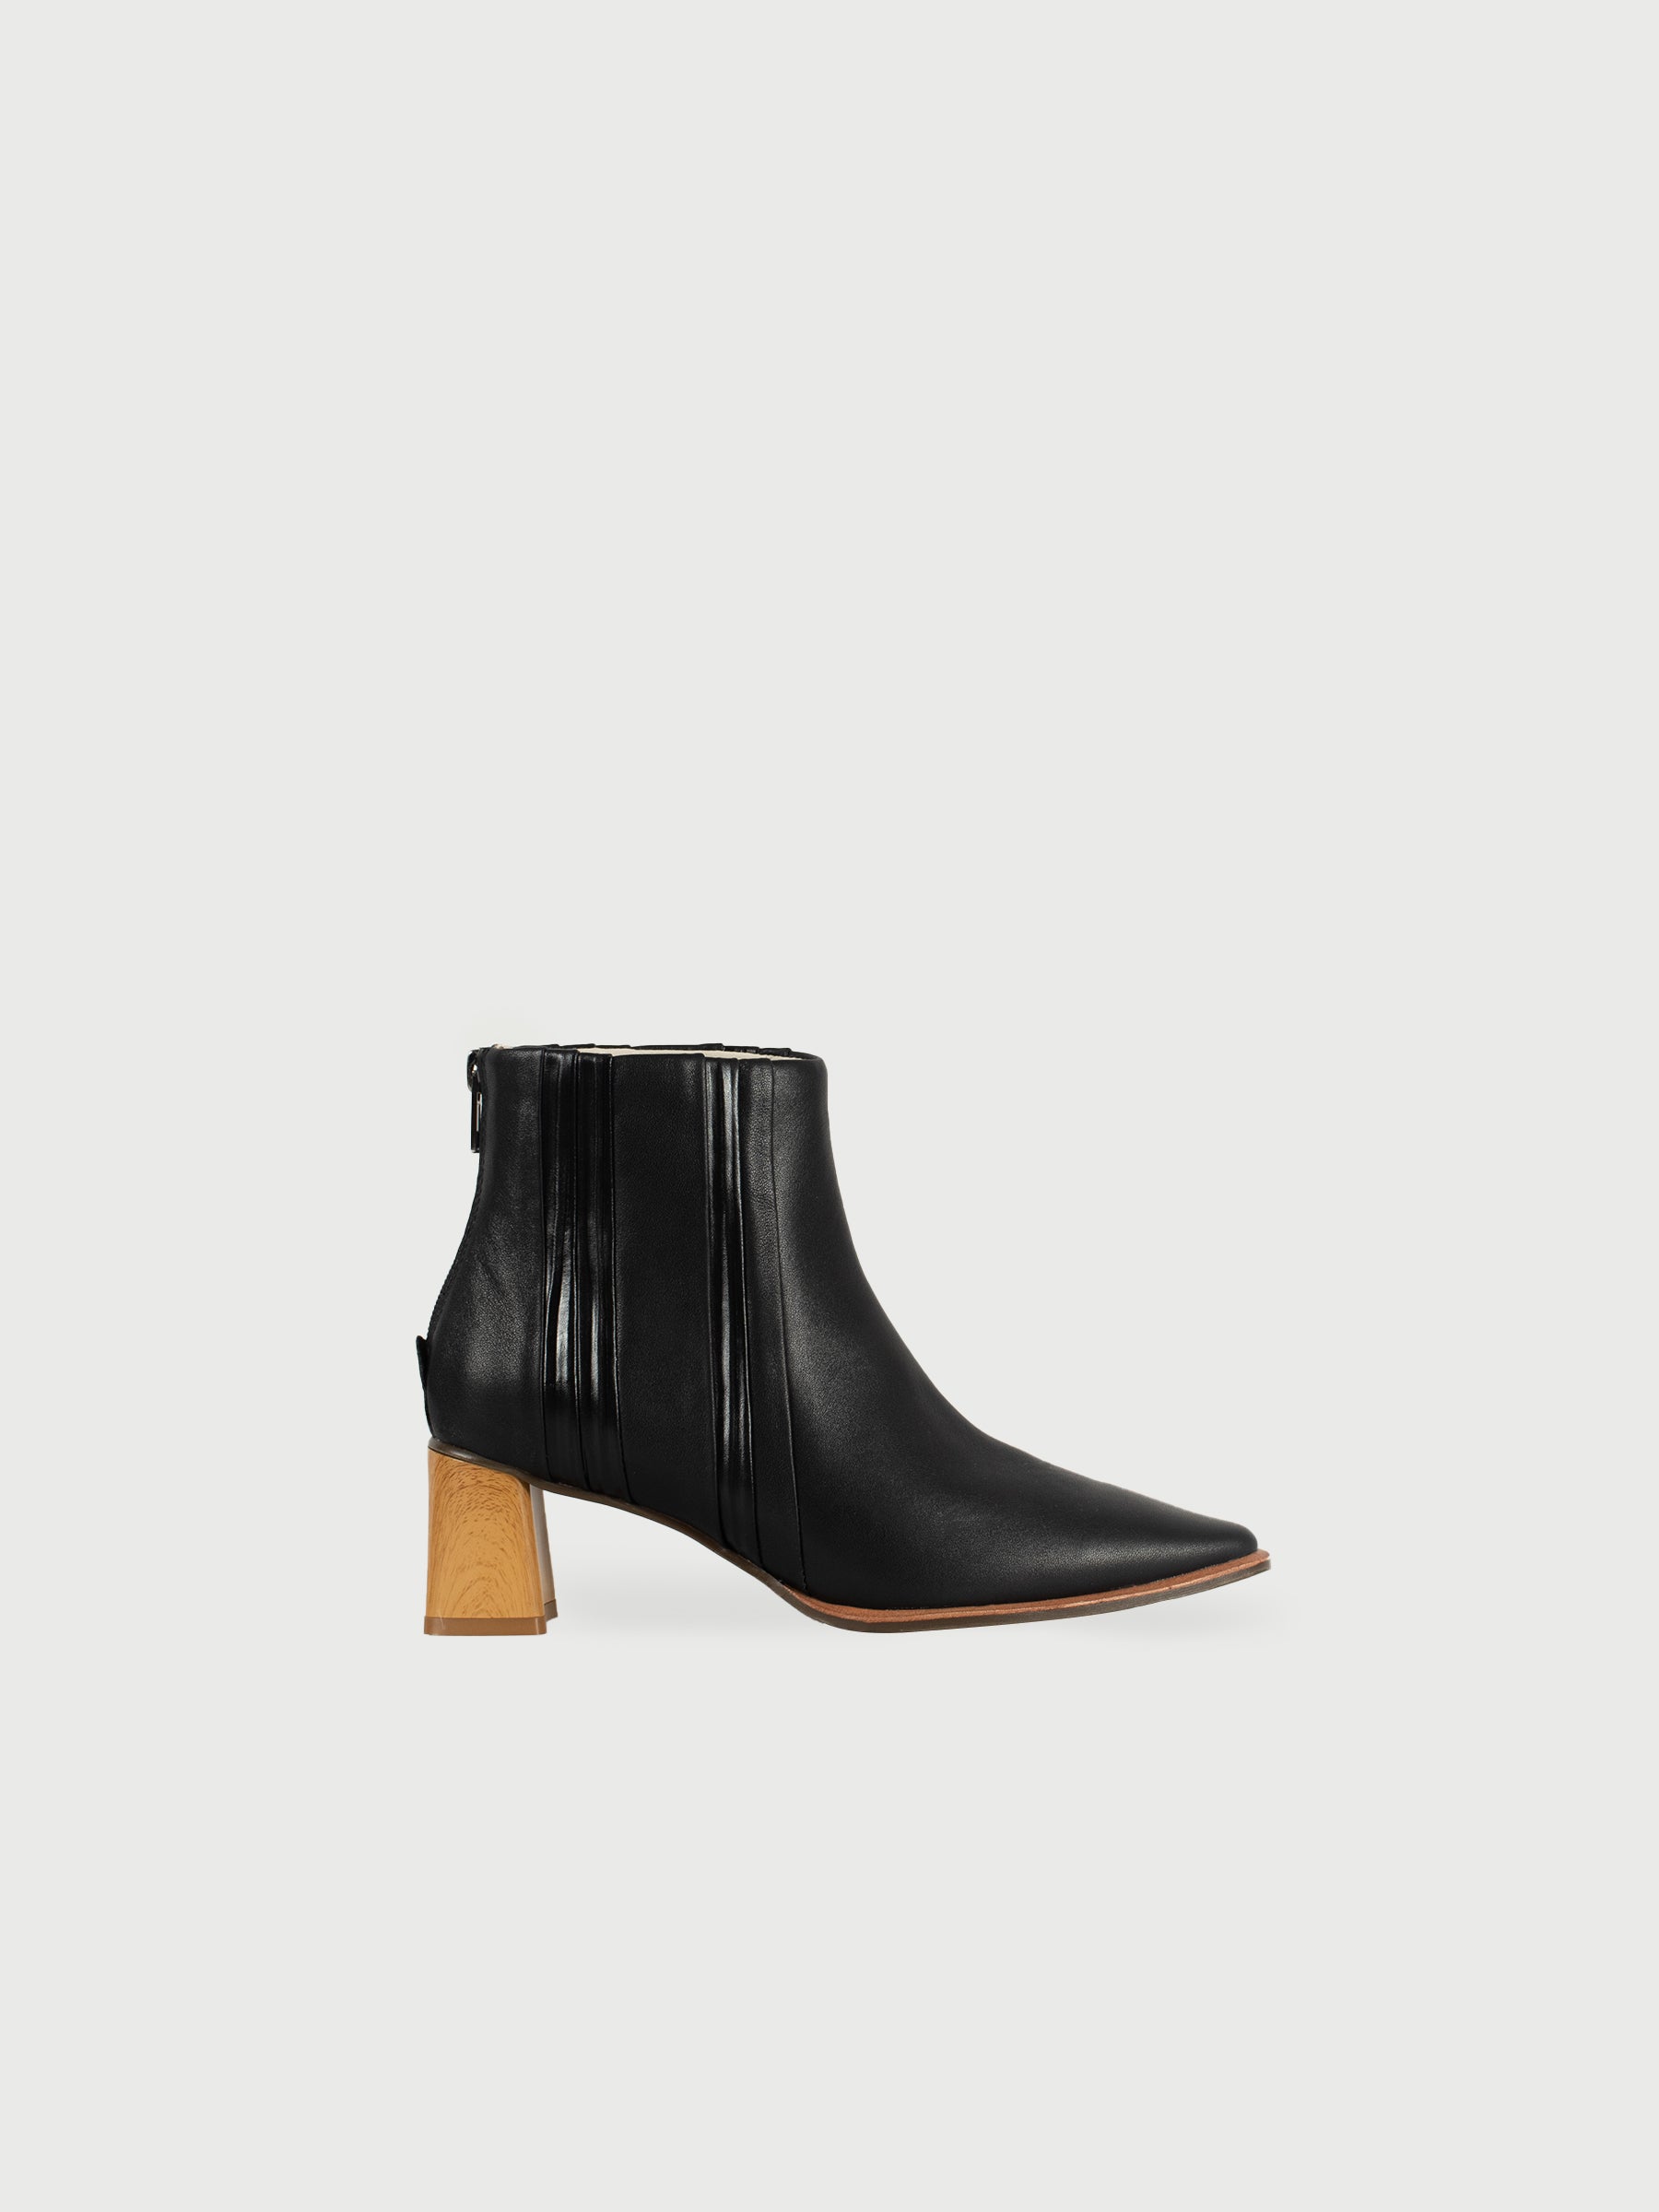 Wooden-Heel Striped Ankle Boots